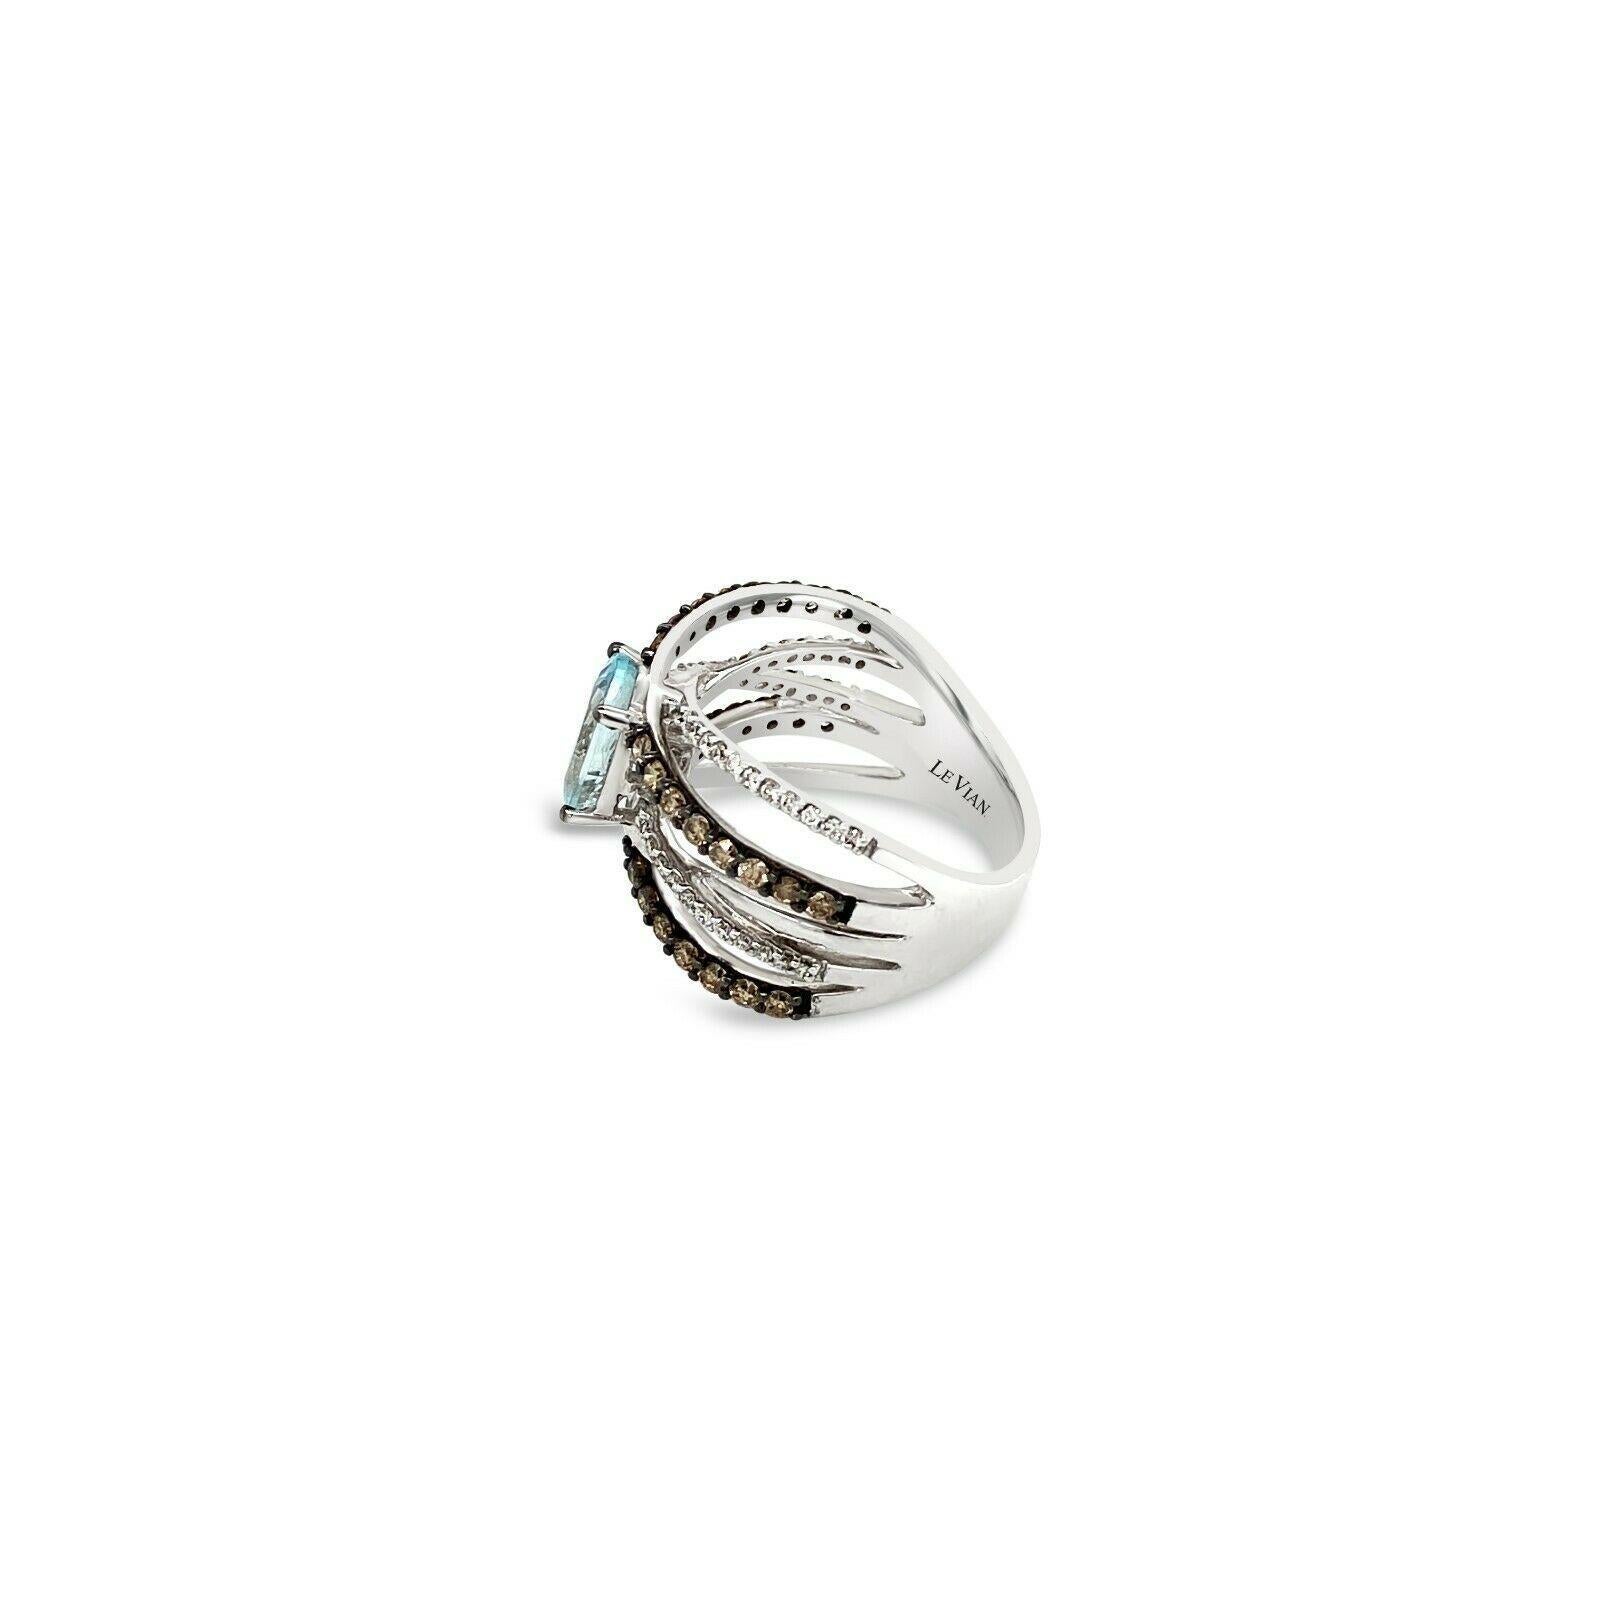 LeVian 14K White Gold Aqua Chocolate Brown Round Diamond New Swirl Cocktail Ring In New Condition For Sale In Great Neck, NY